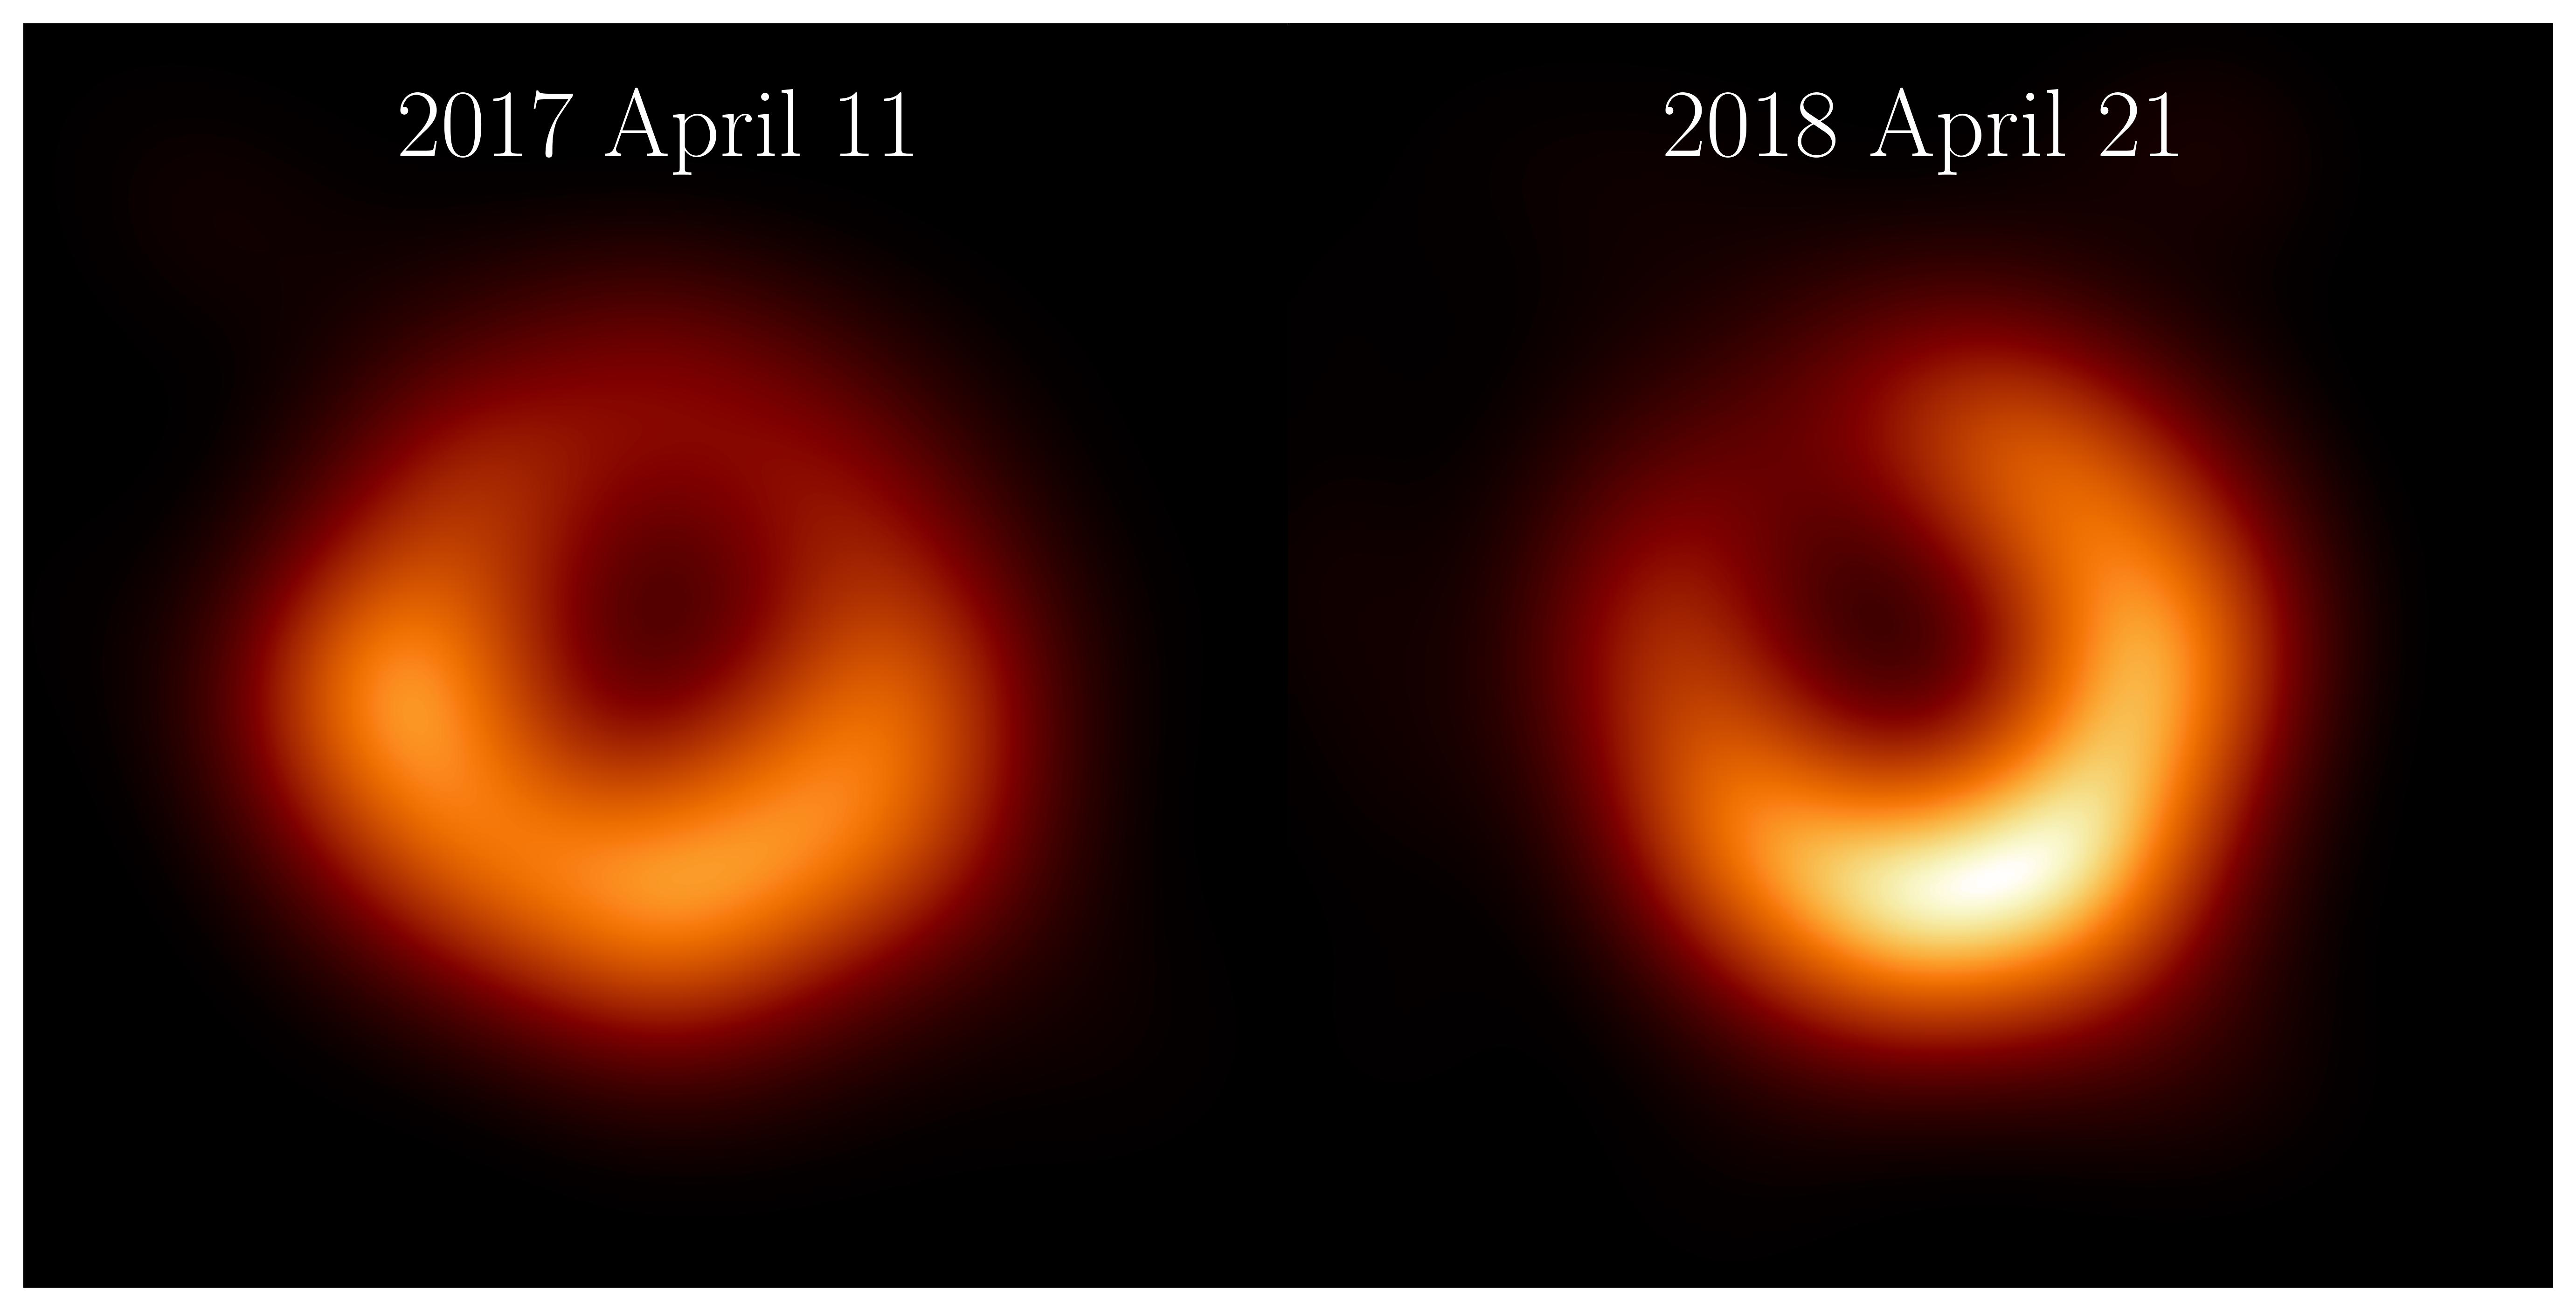 The Event Horizon Telescope Collaboration has released new images of M87* from observations taken in April 2018, one year after the first observations were taken. The new images, featuring the first participation of the Greenland Telescope in the EHT Collaboration, reveal a familiar, bright ring of emission of the same size as we found in 2017. This bright ring surrounds a dark central shadow, and the brightest part of the ring in 2018 has shifted by about 30º counter clockwise relative to its position in 2017. Credit: Event Horizon Telescope Collaboration.